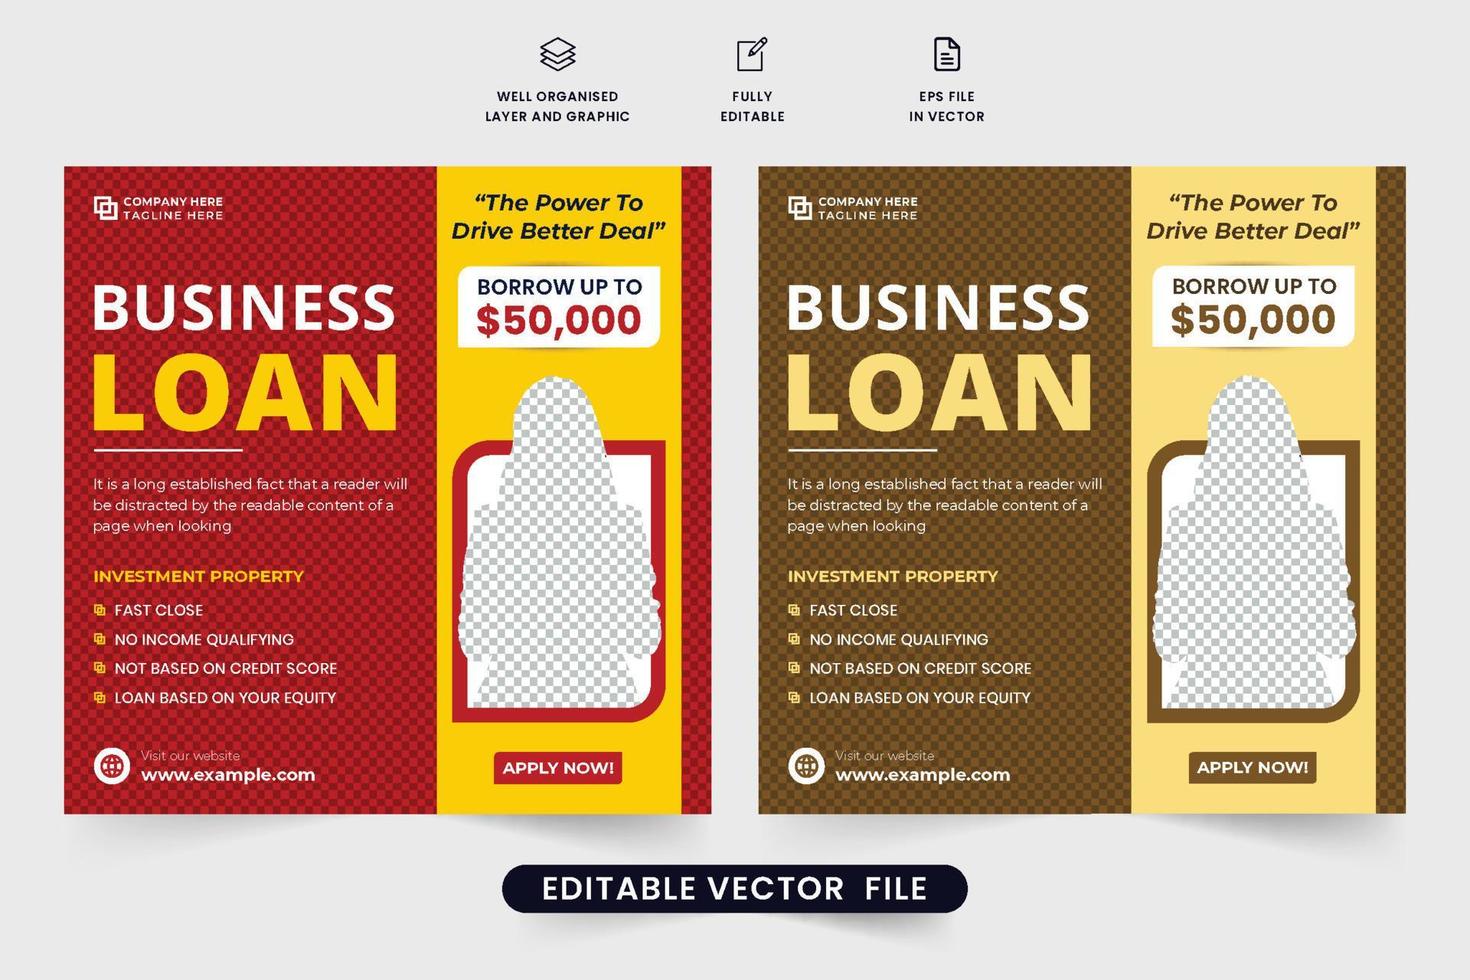 Small business loan social media post template with red and yellow colors. Banking service advertisement poster design for home or car loans. Personal bank loan promotional web banner template. vector